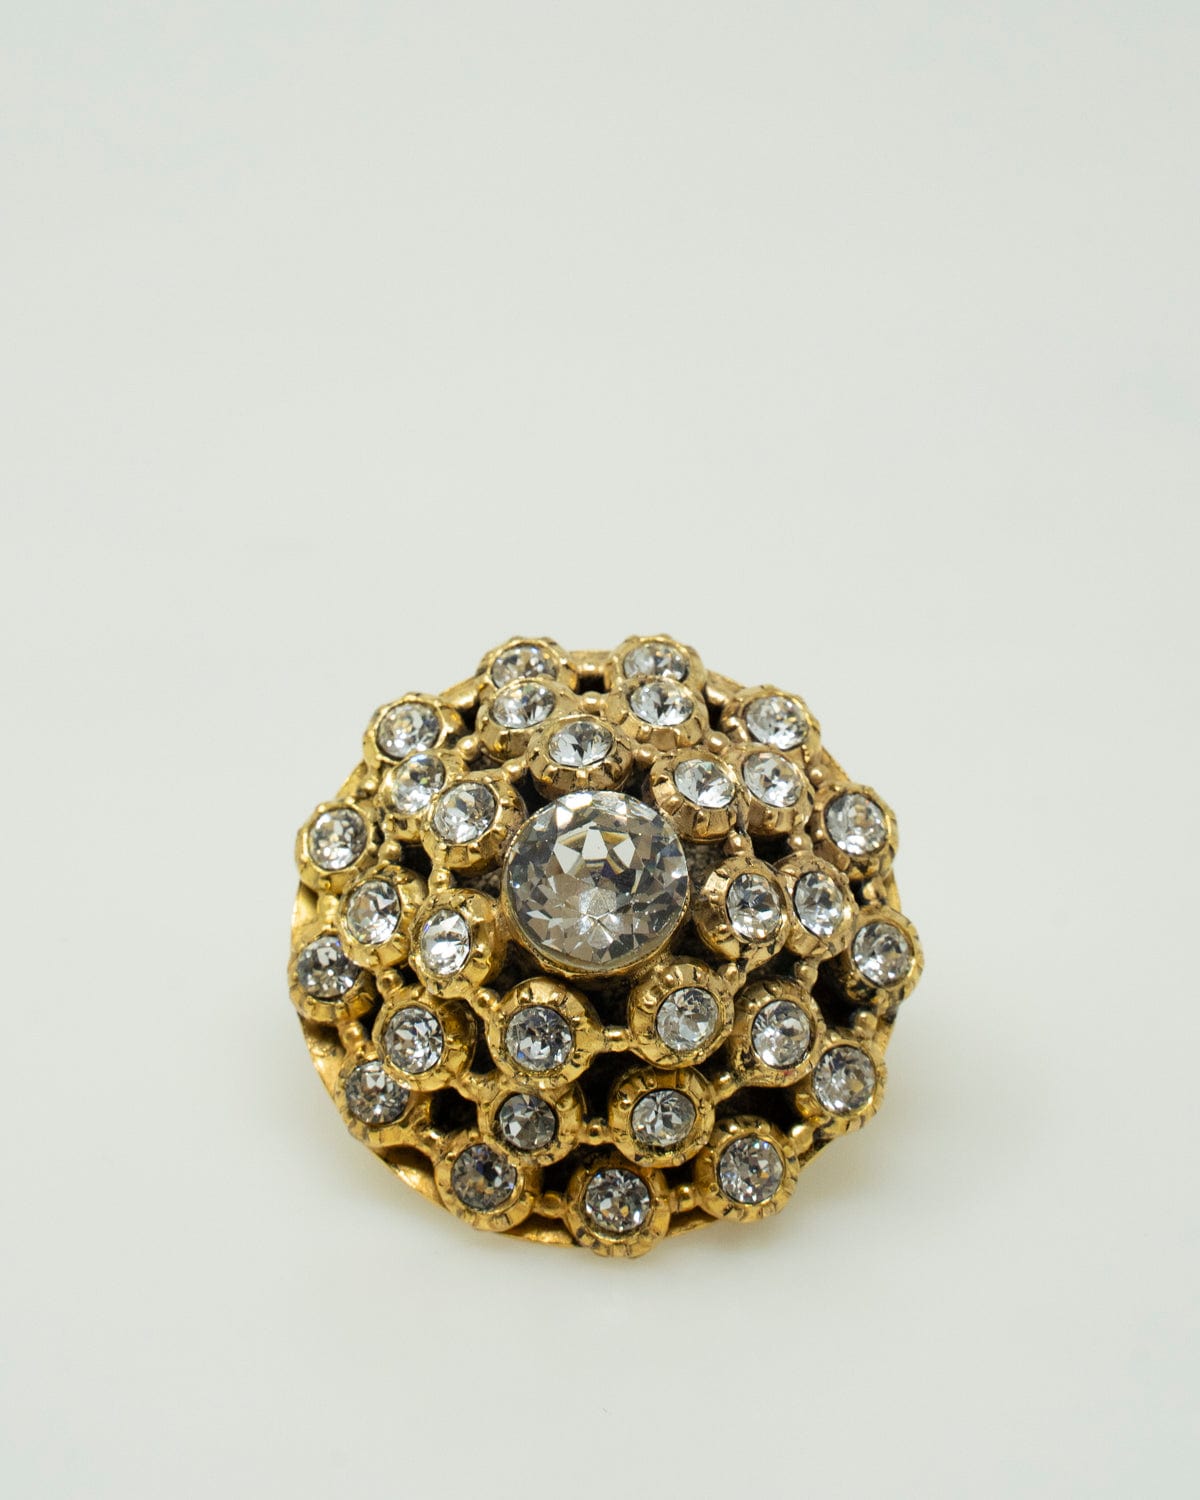 Chanel Vintage Chanel Spectacular Jewel Of The 1980s Domed Crystal Brooch - ASL2232